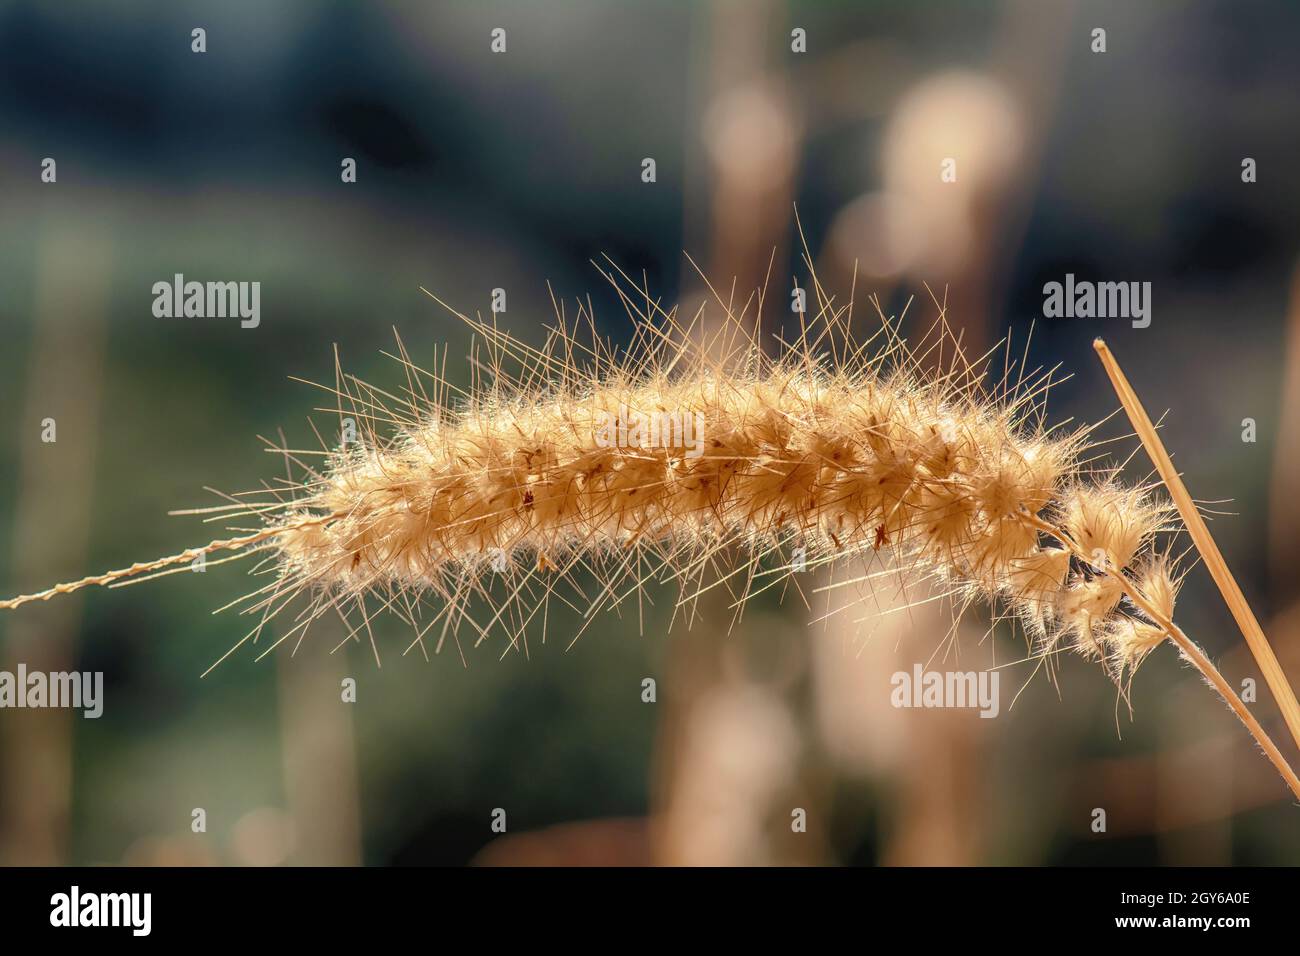 Pennisetum pedicellatum is a grass one type. The grass species are important food sources for livestock. Stock Photo